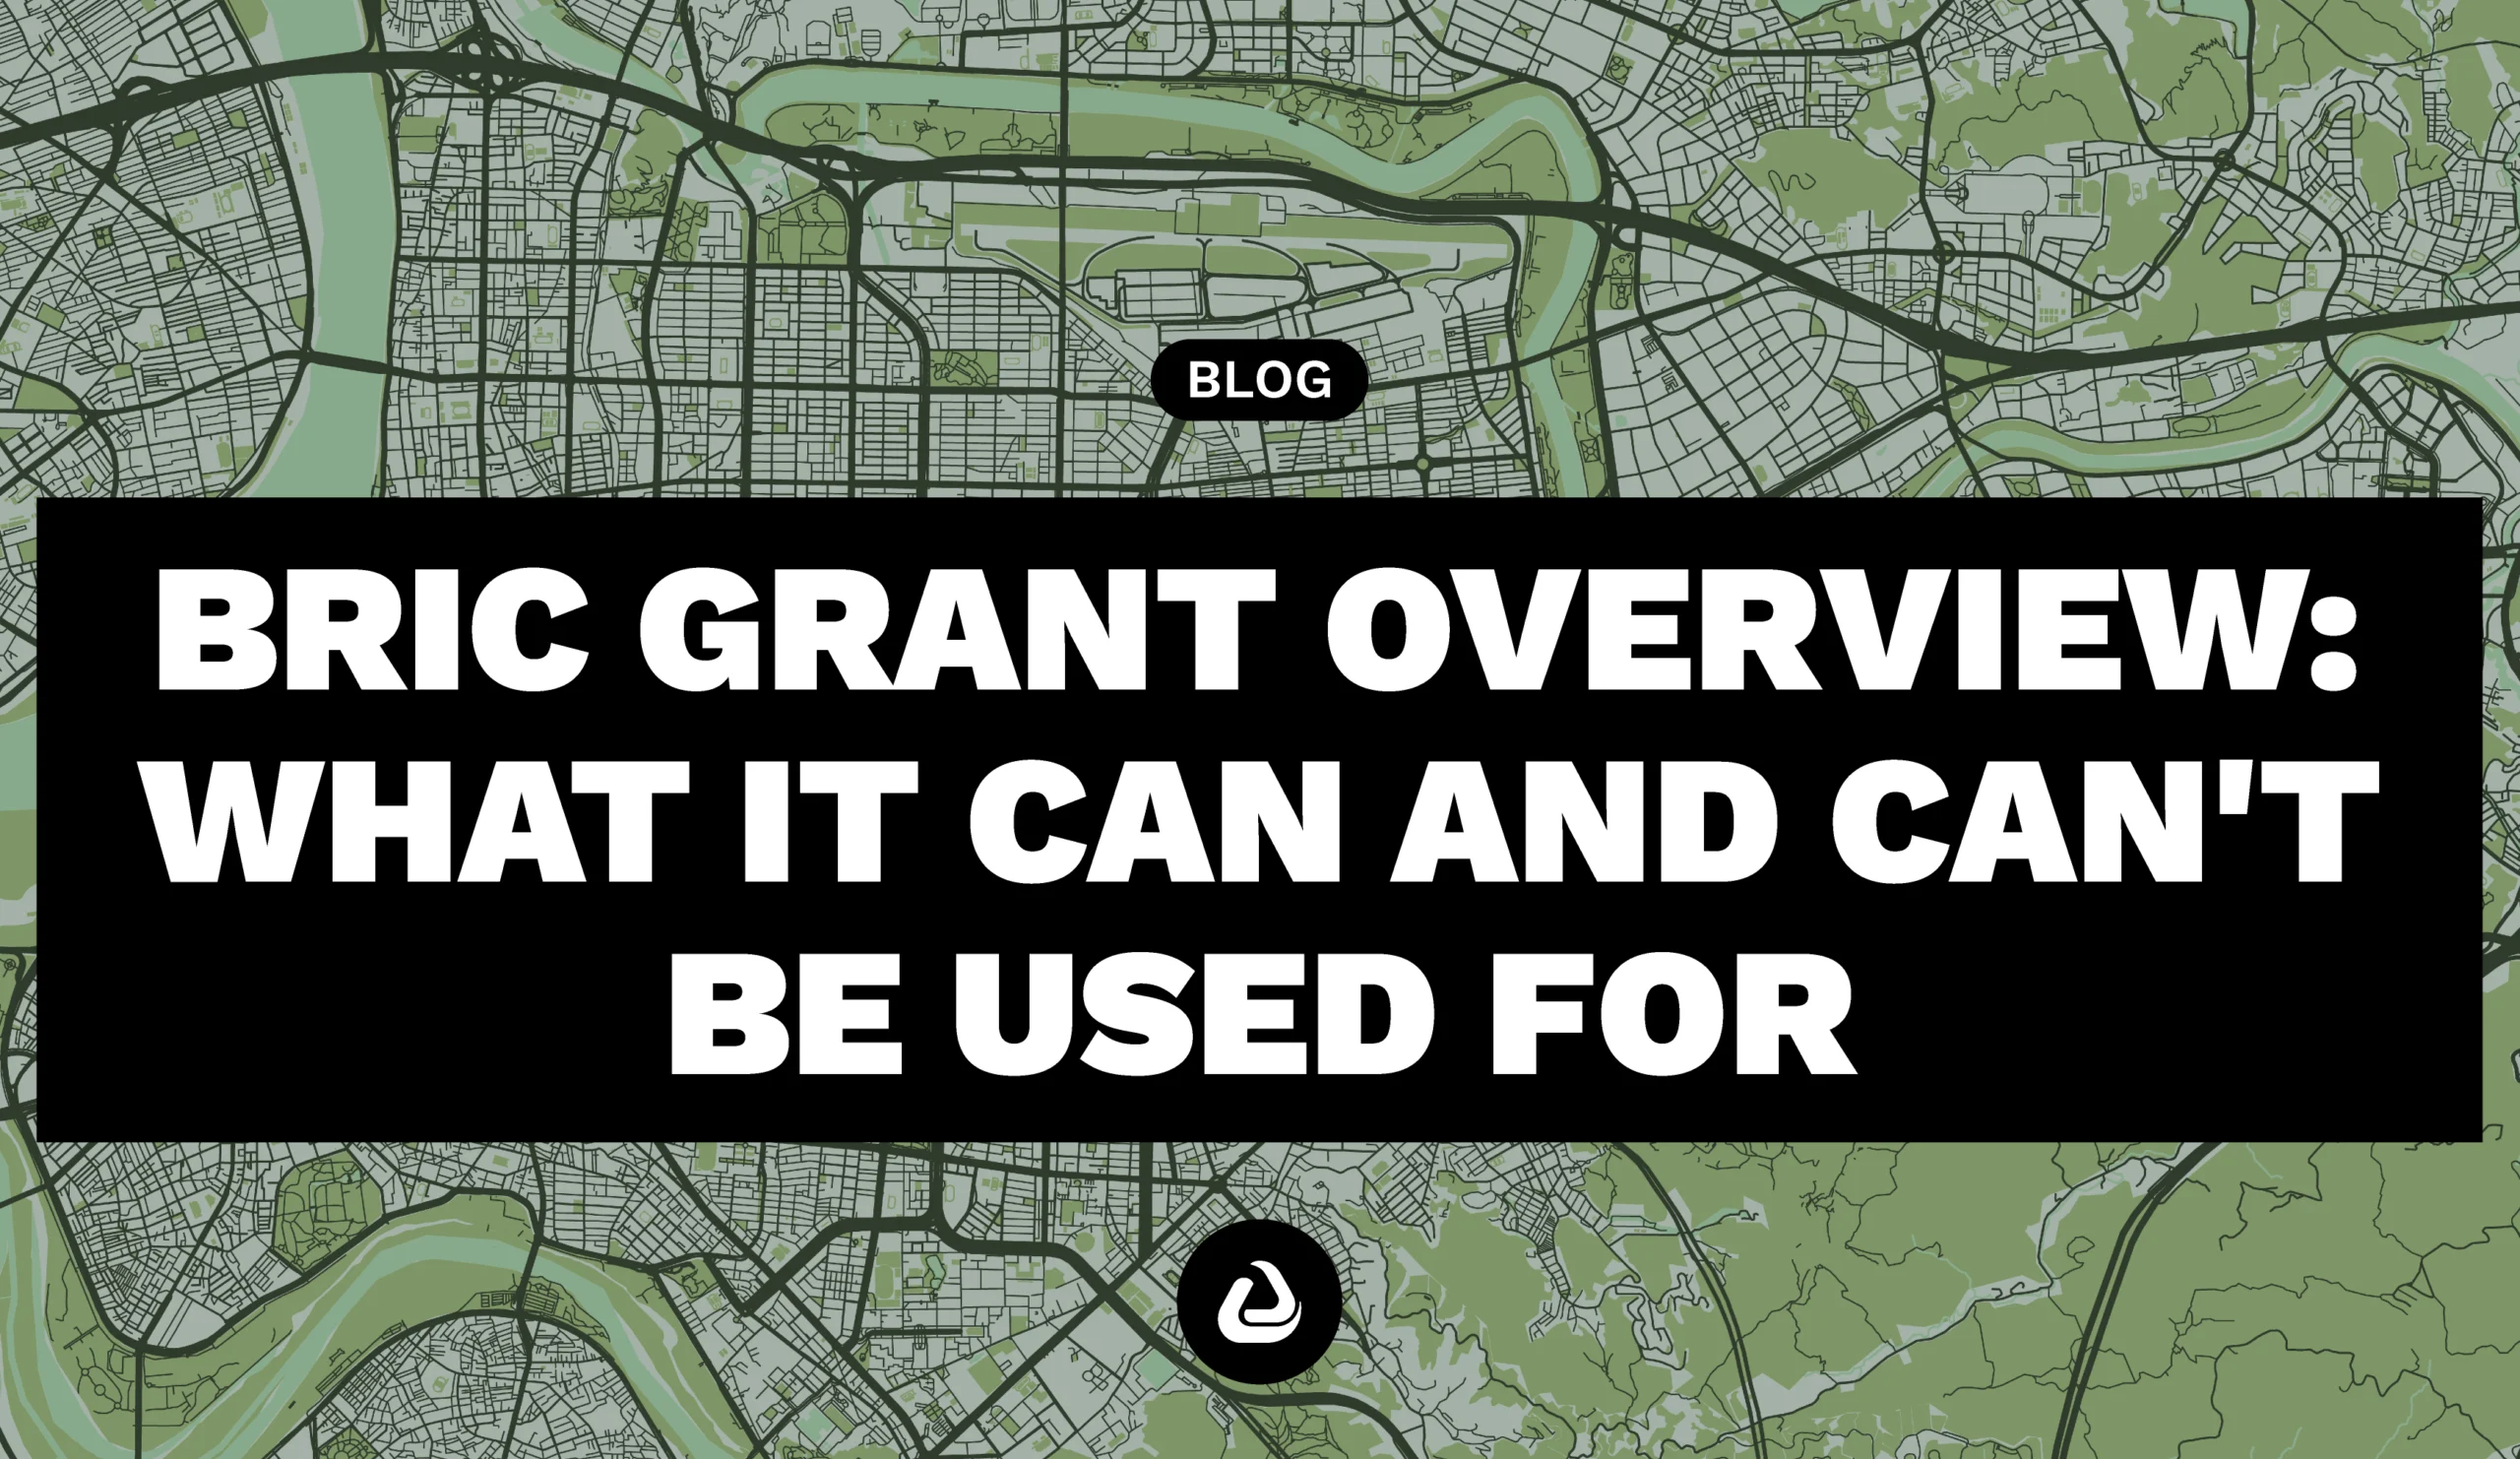 What you can use the BRIC grant for?